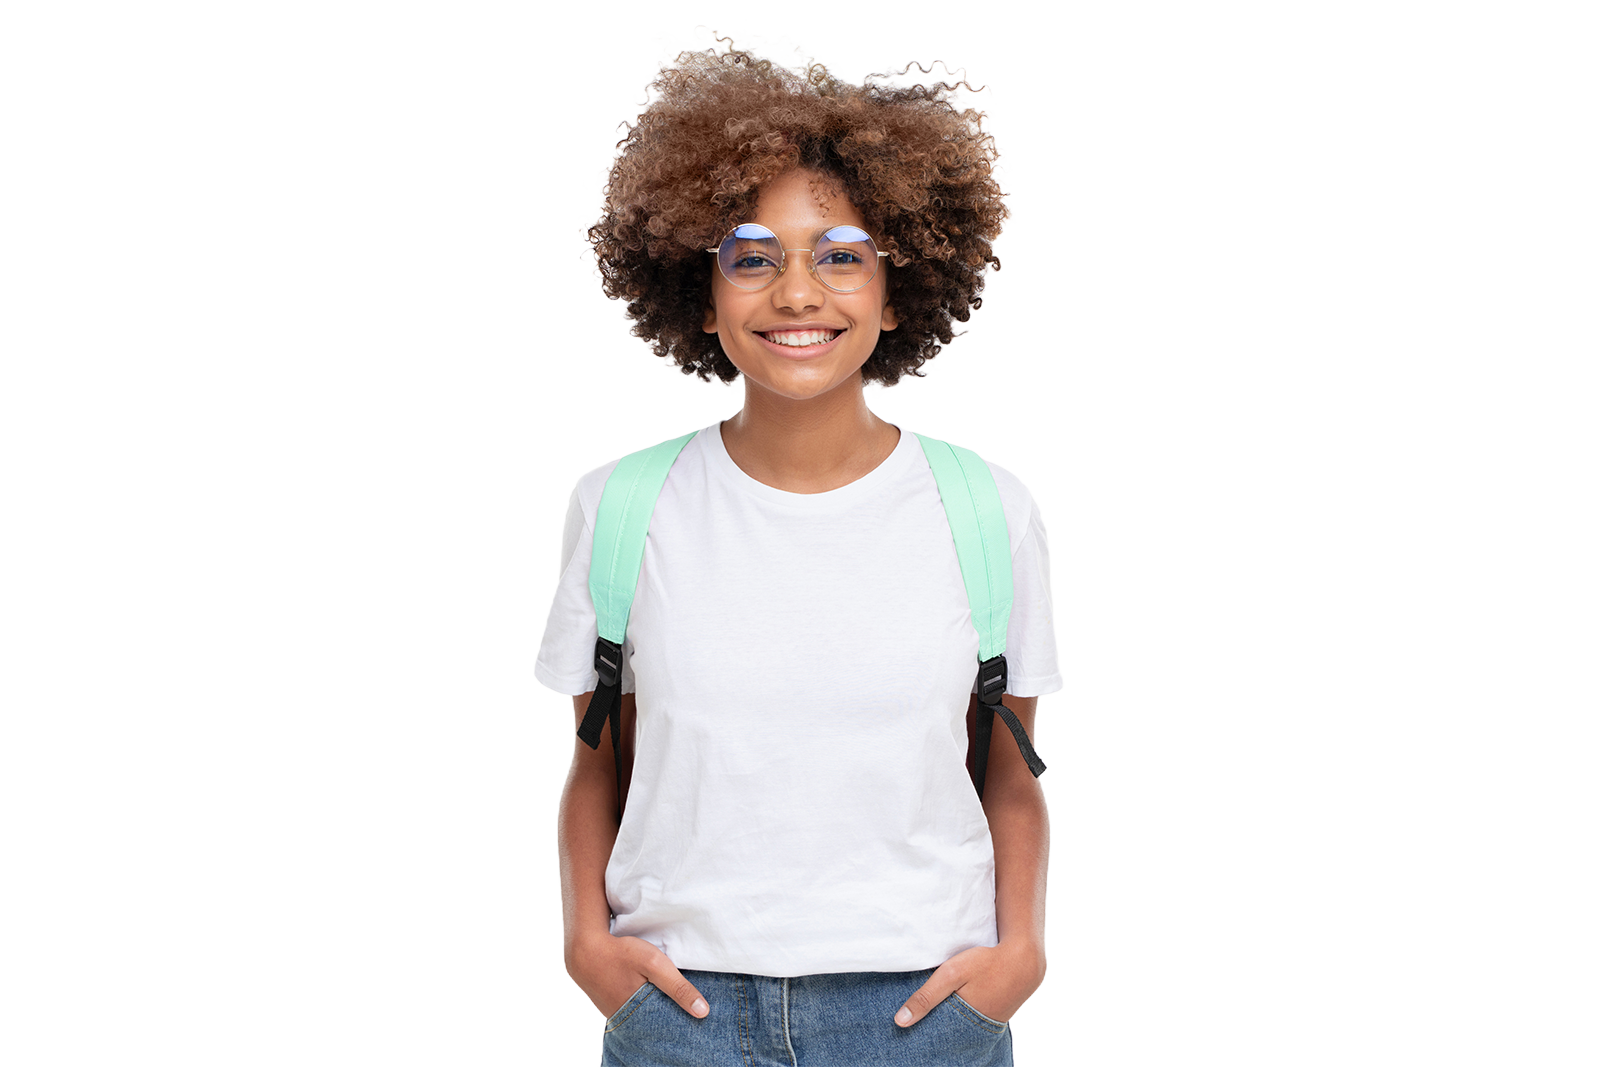 Smiling teenage girl with glasses and wearing a backpack with her hands in her pockets